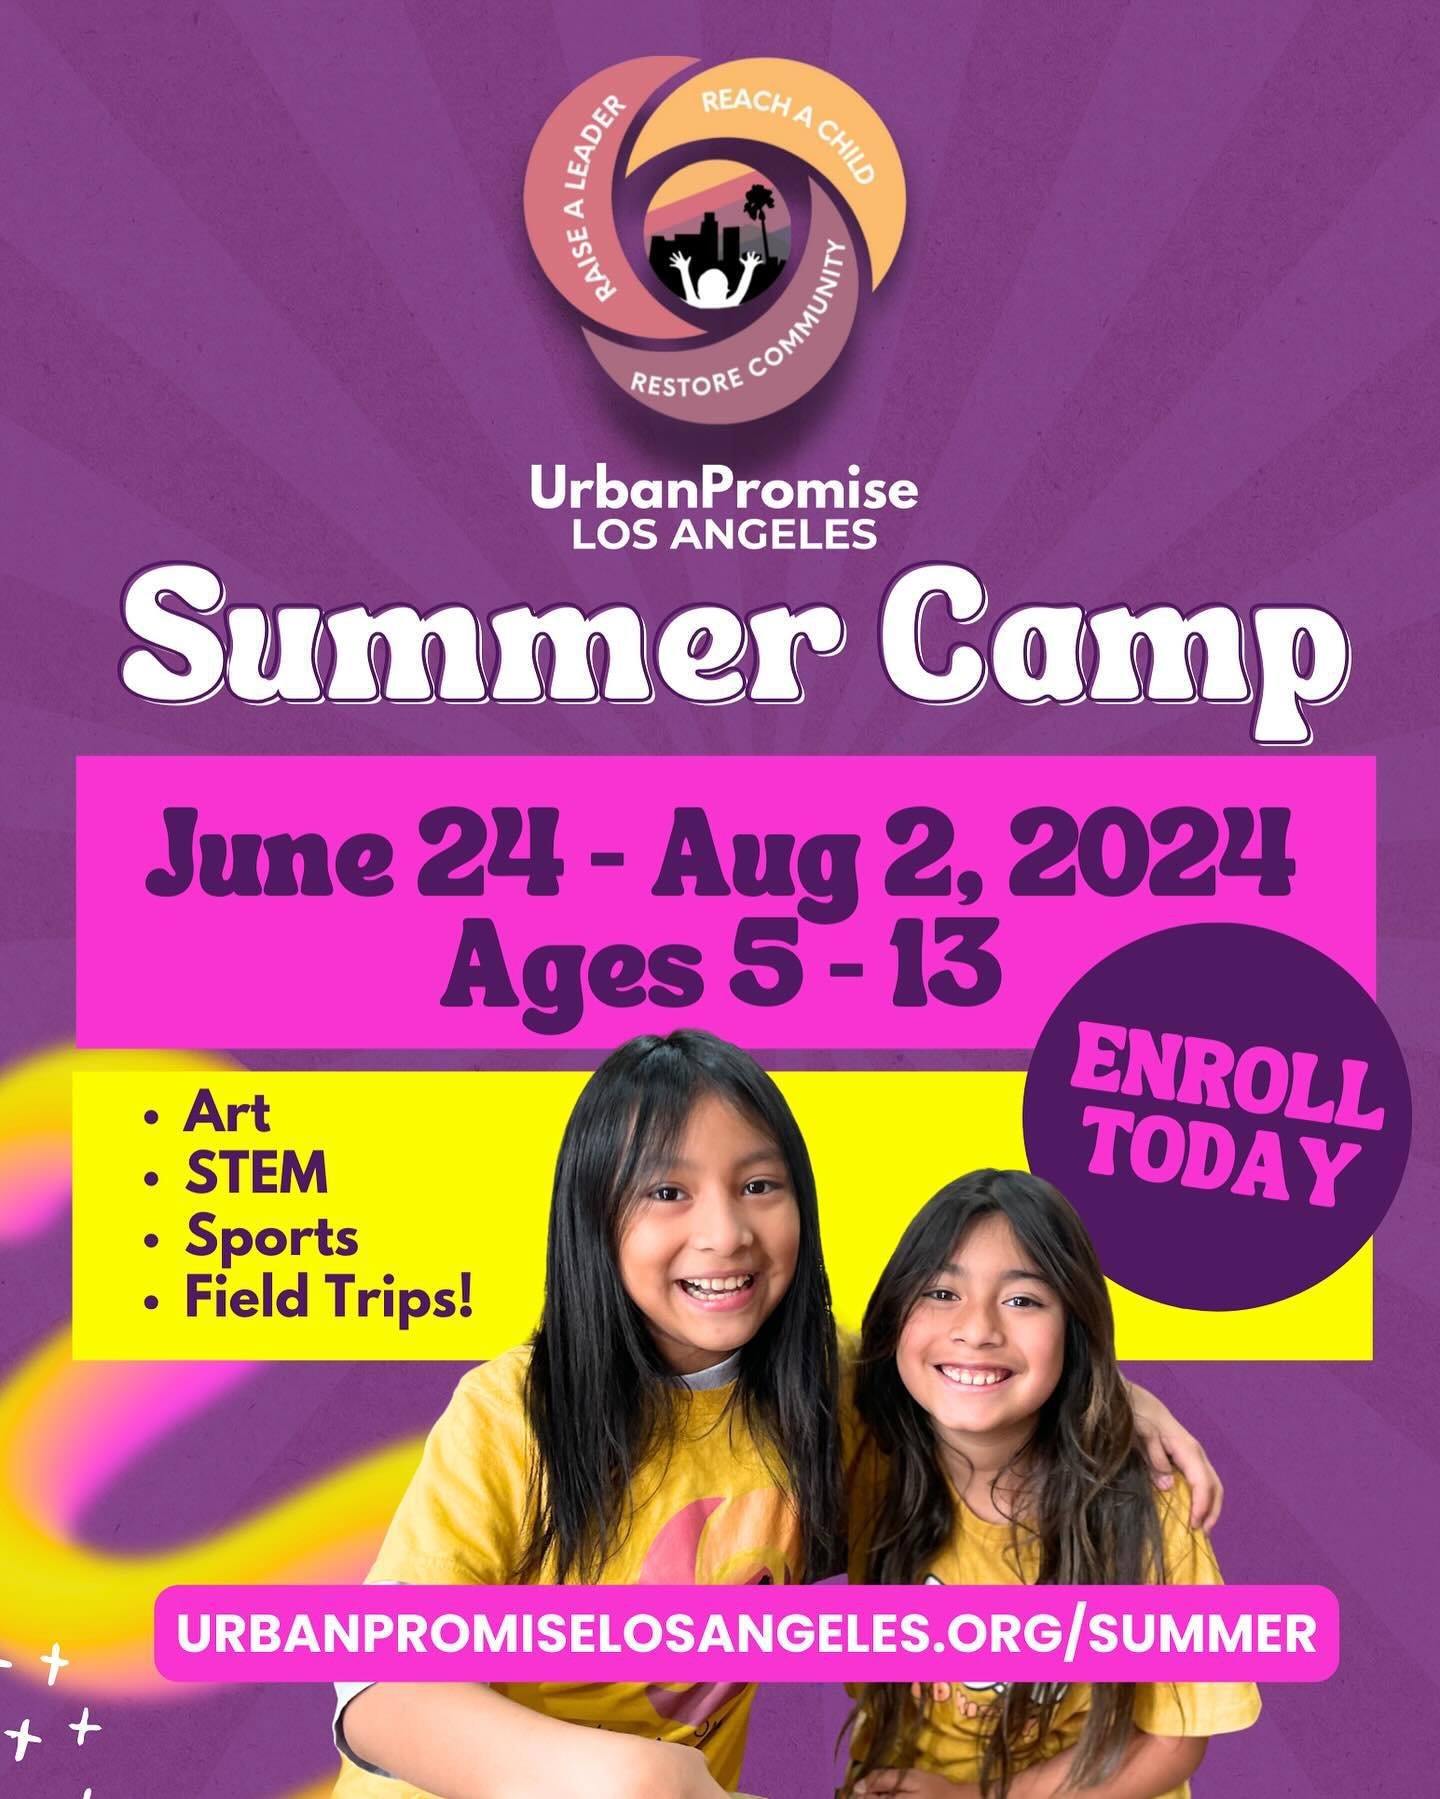 Hey Canoga Park/West Valley parents! Registration is now open for UPLA&rsquo;s summer camp! Don&rsquo;t miss out on this amazing opportunity for your kids to have a fun and enriching summer experience. Sign up now ((link in bio)) before spots fill up